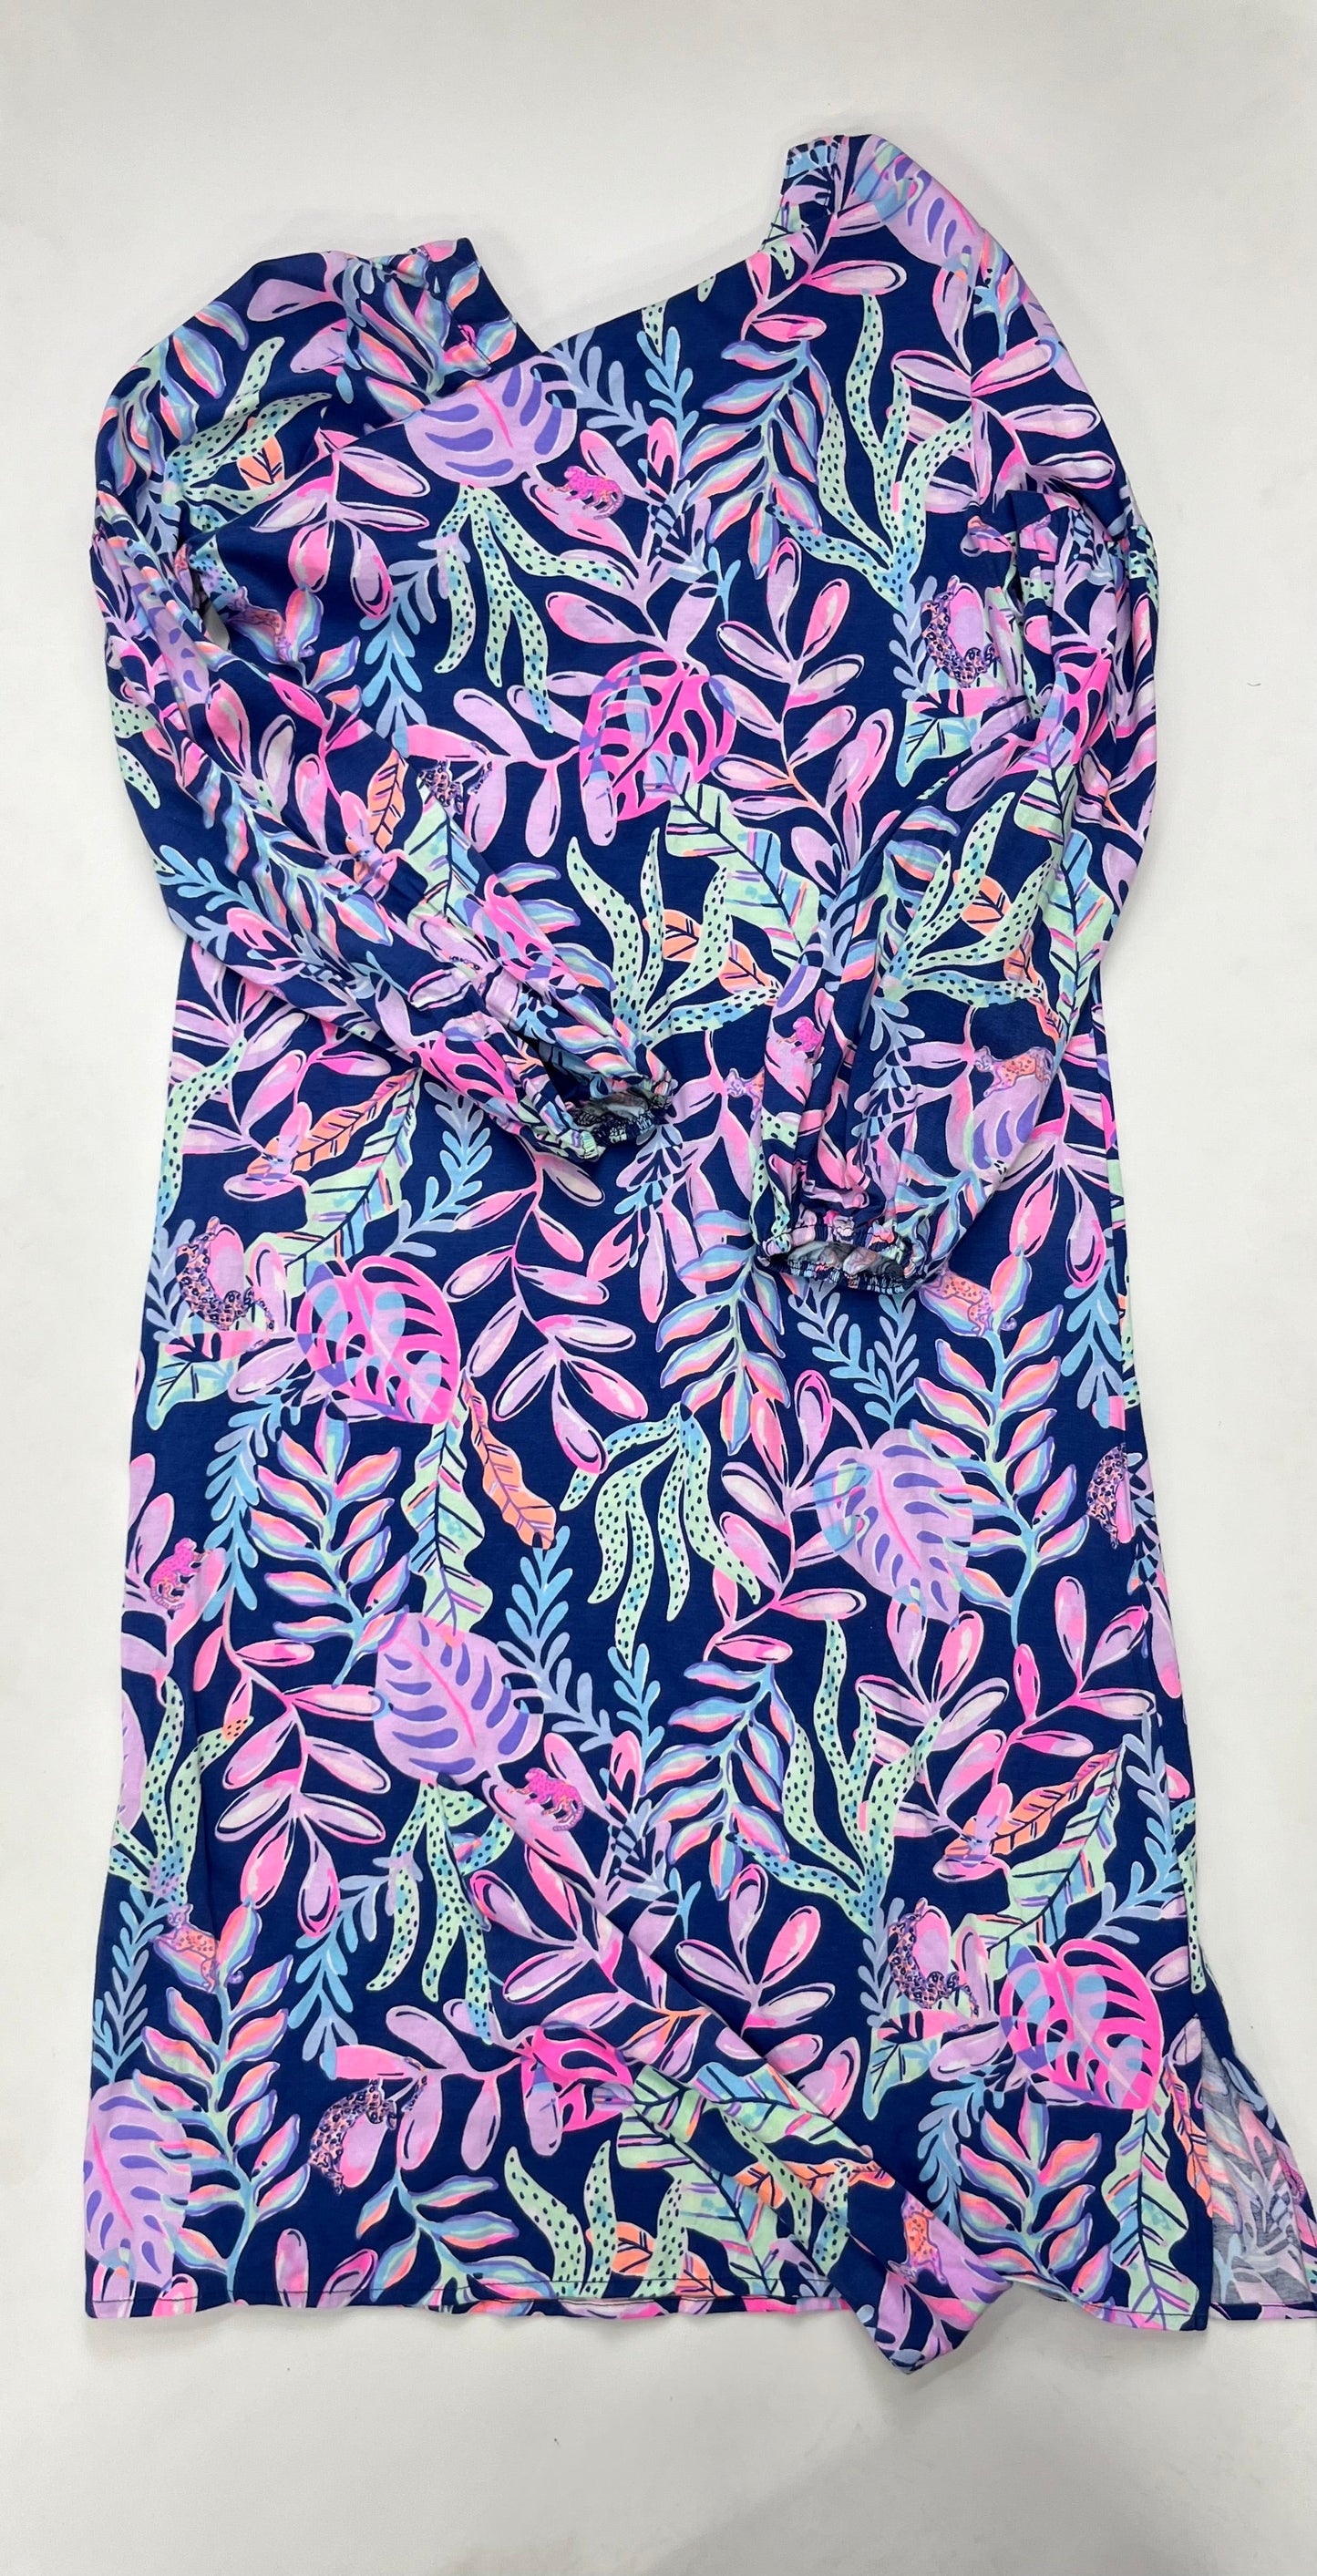 Multi-colored Dress Work Lilly Pulitzer, Size S